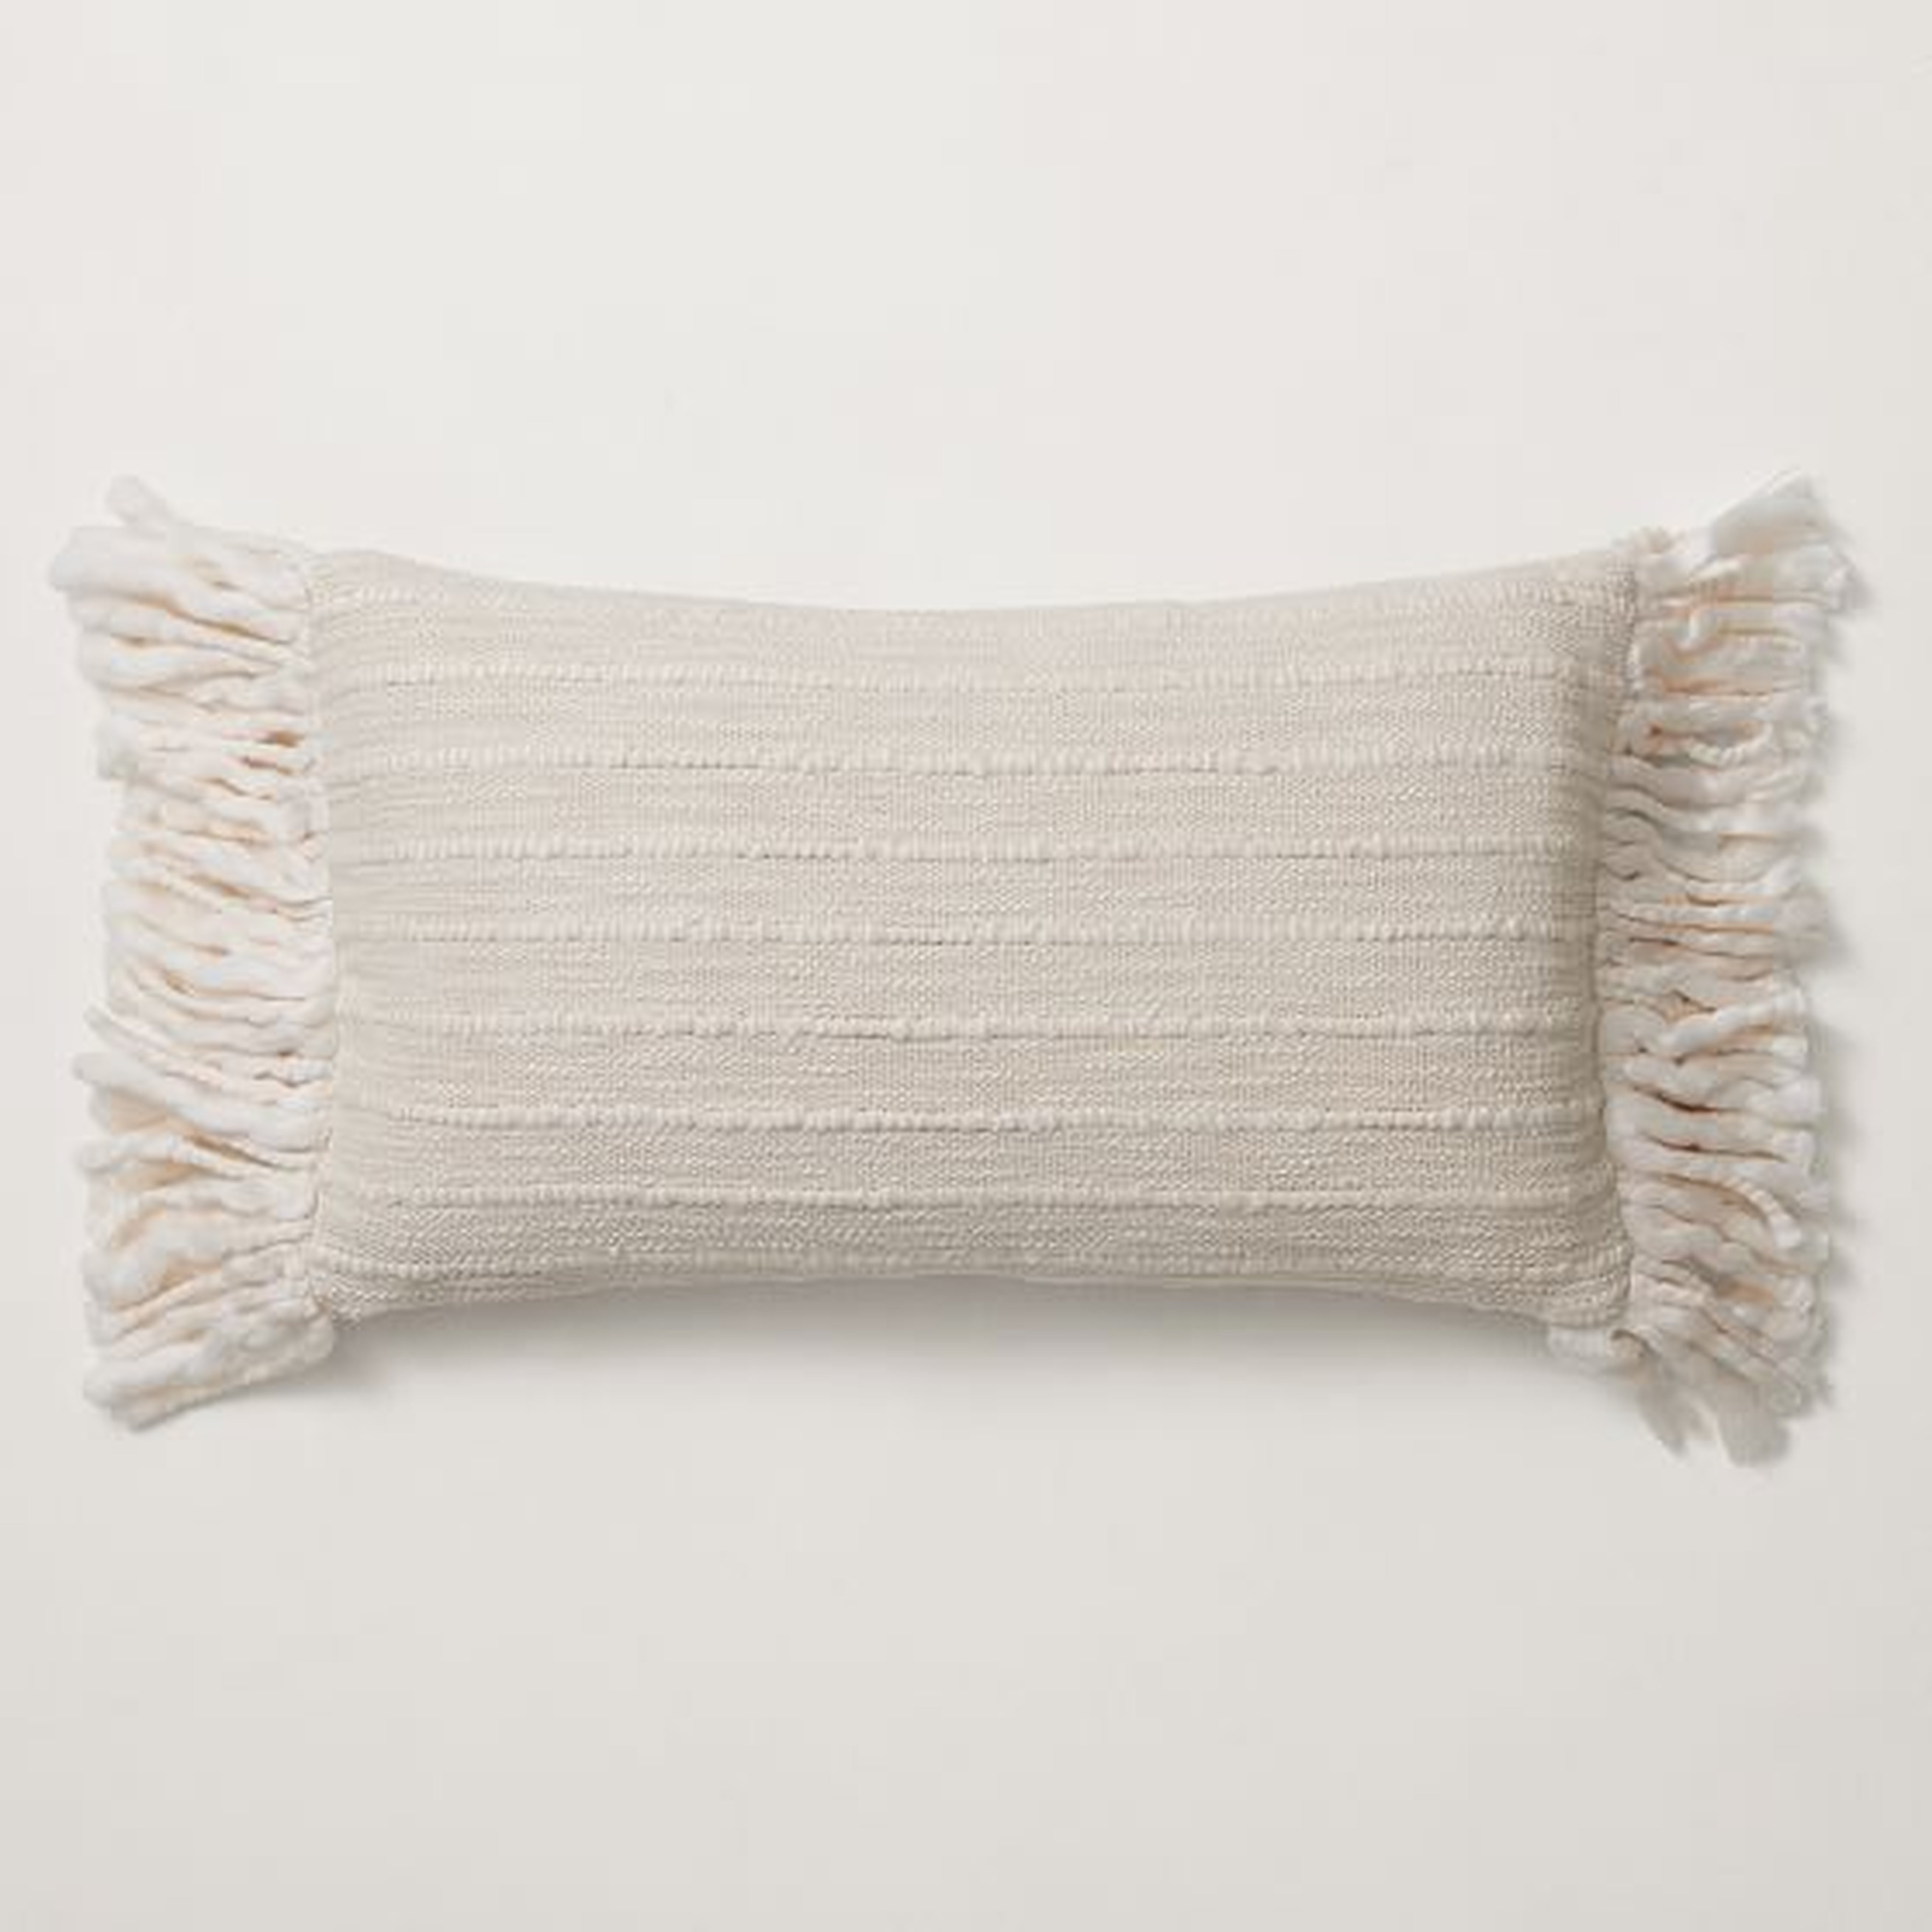 Soft Corded Chunky Fringe Pillow Cover, 12"x21", Natural Canvas - West Elm